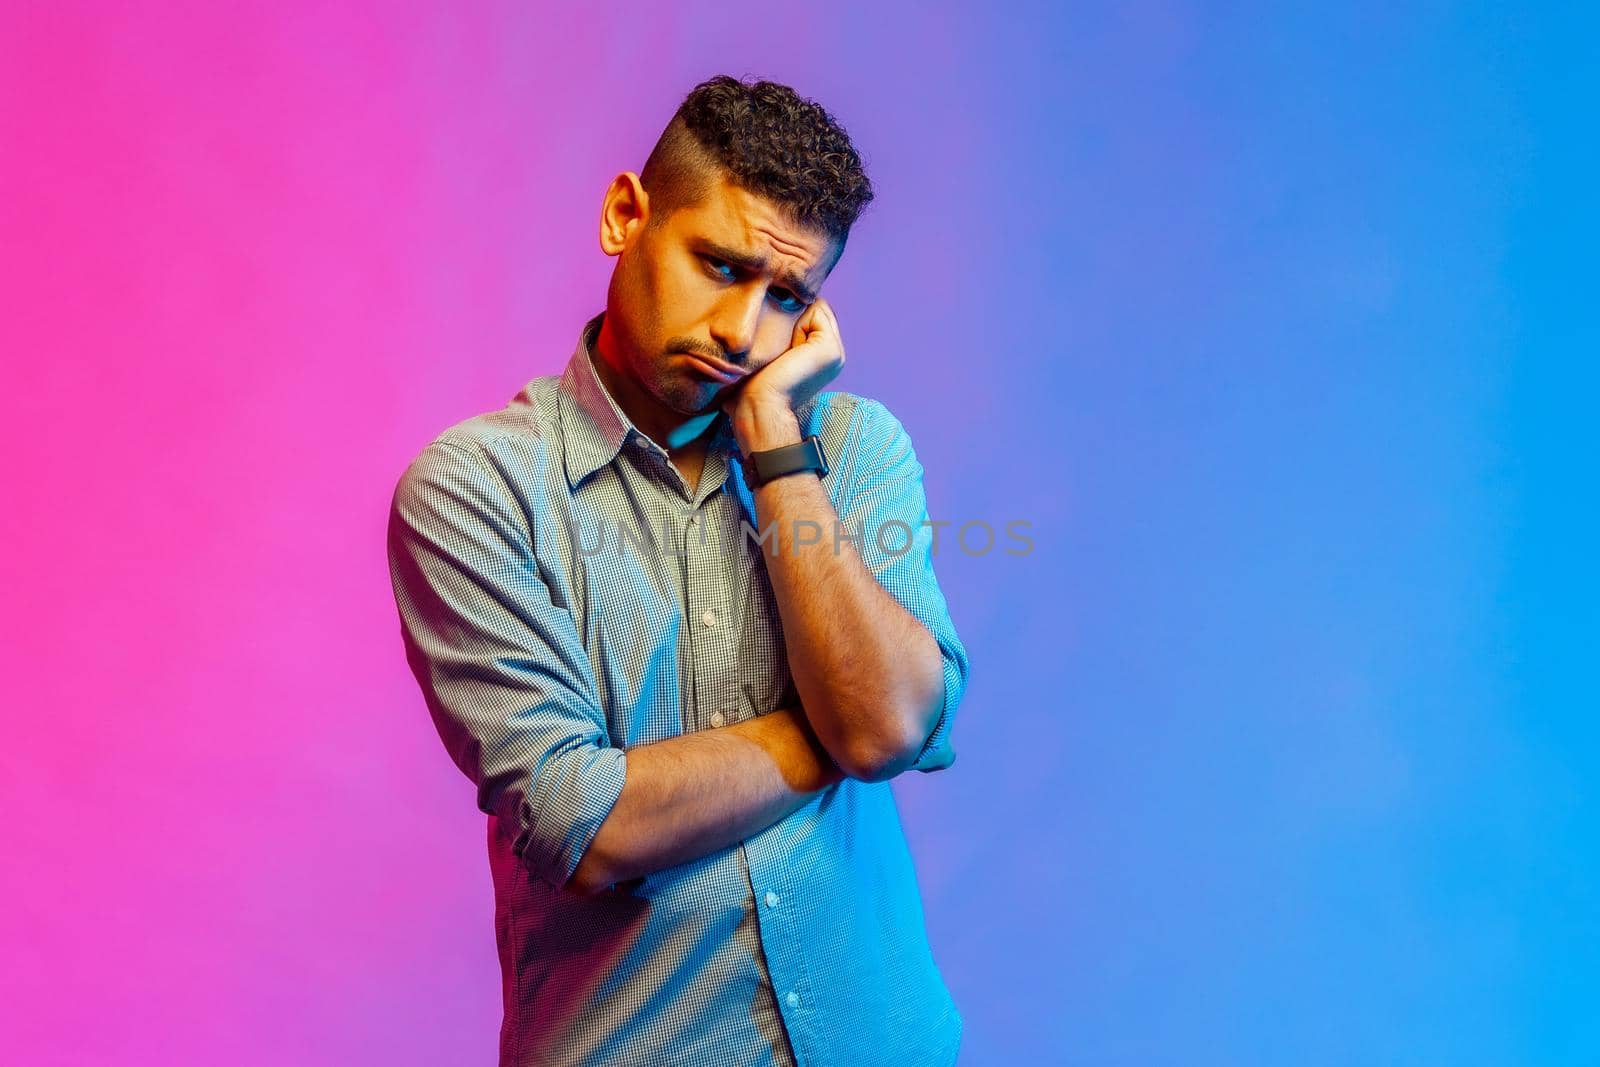 Portrait of depressed man in shirt looking at camera with unhappy sad expression, tired of being lonely, feels bored. Indoor studio shot isolated on colorful neon light background.